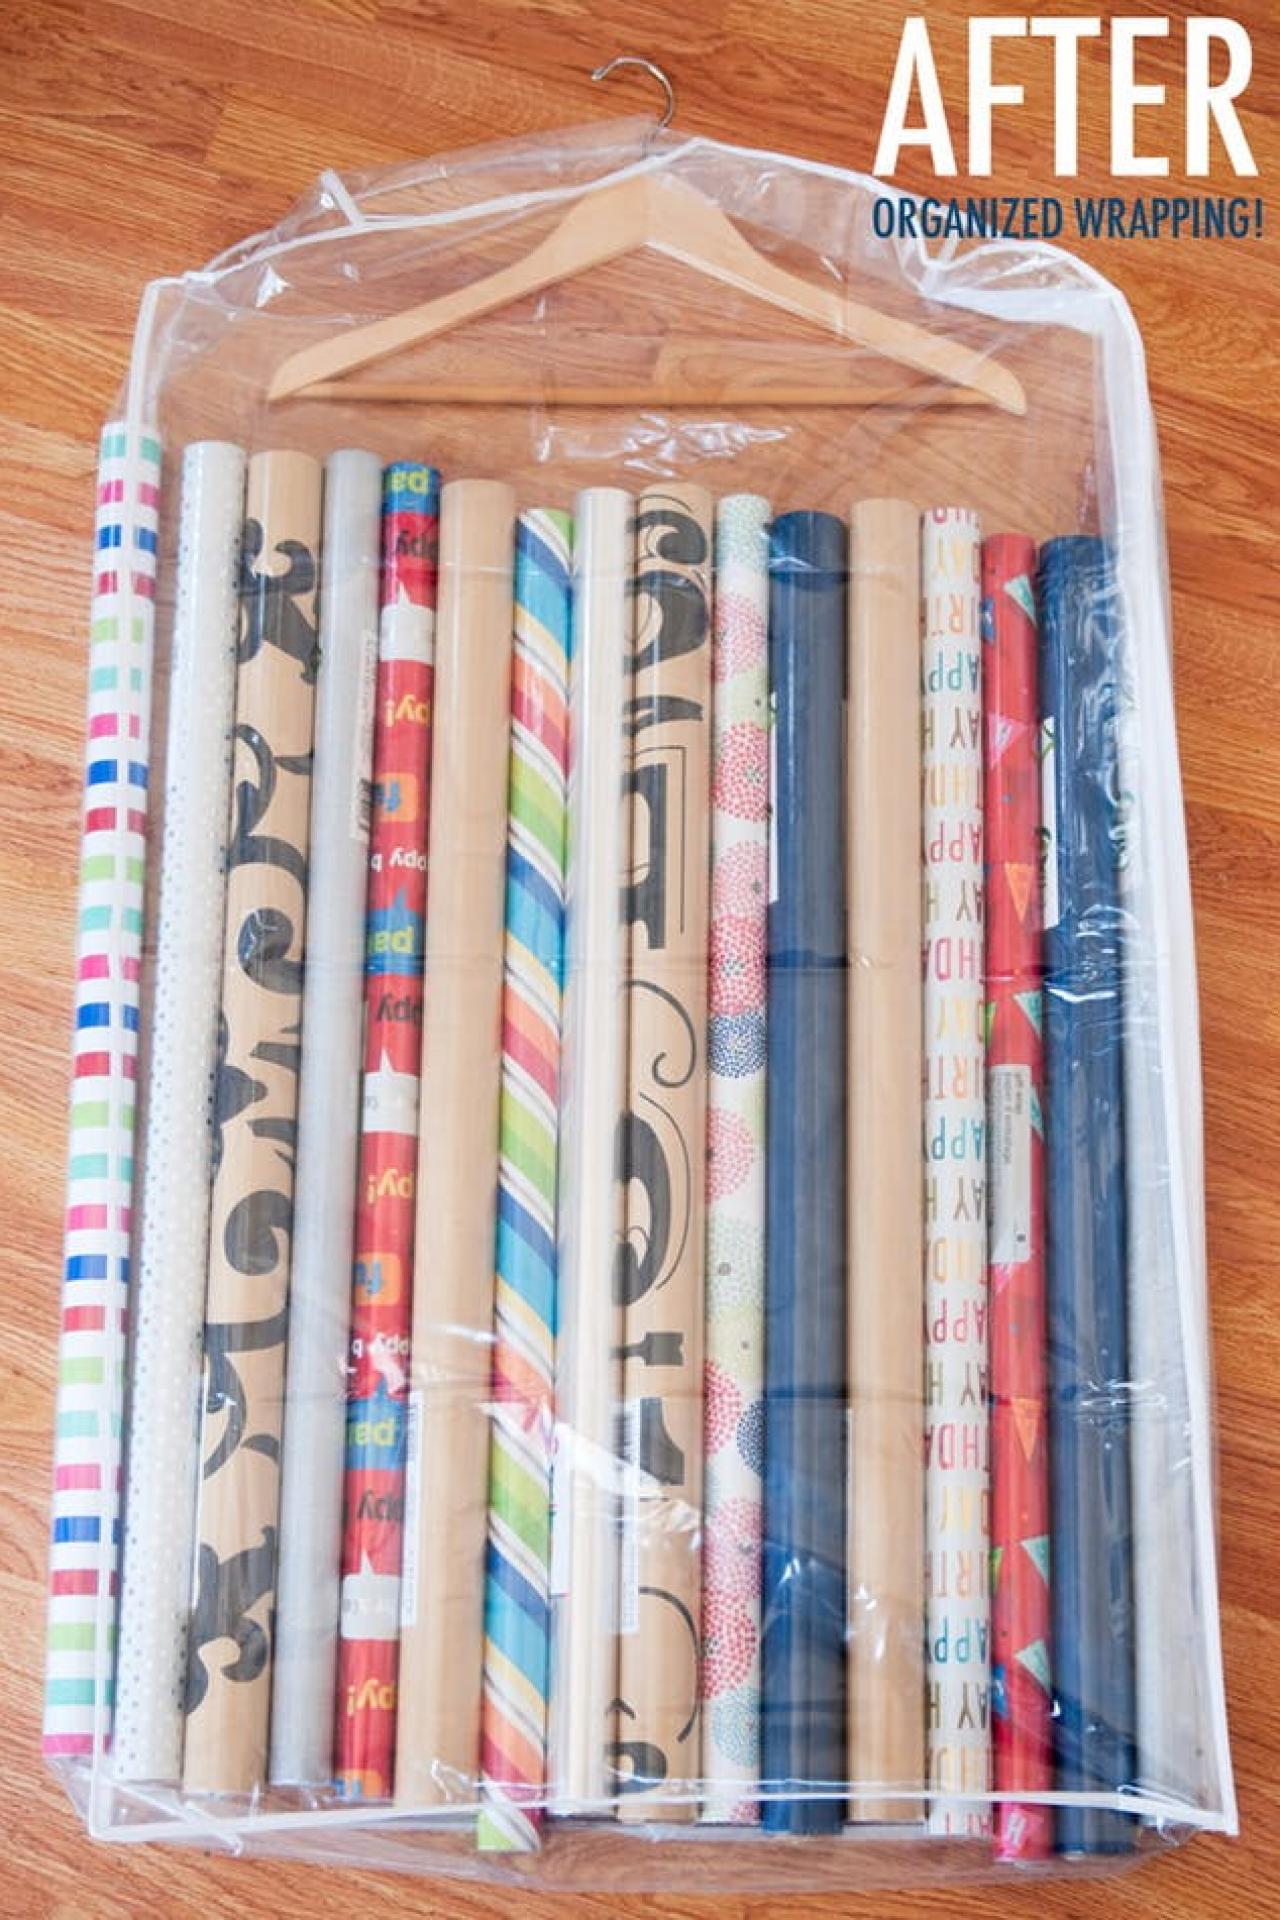 How to store wrapping paper and holiday decor, according to experts